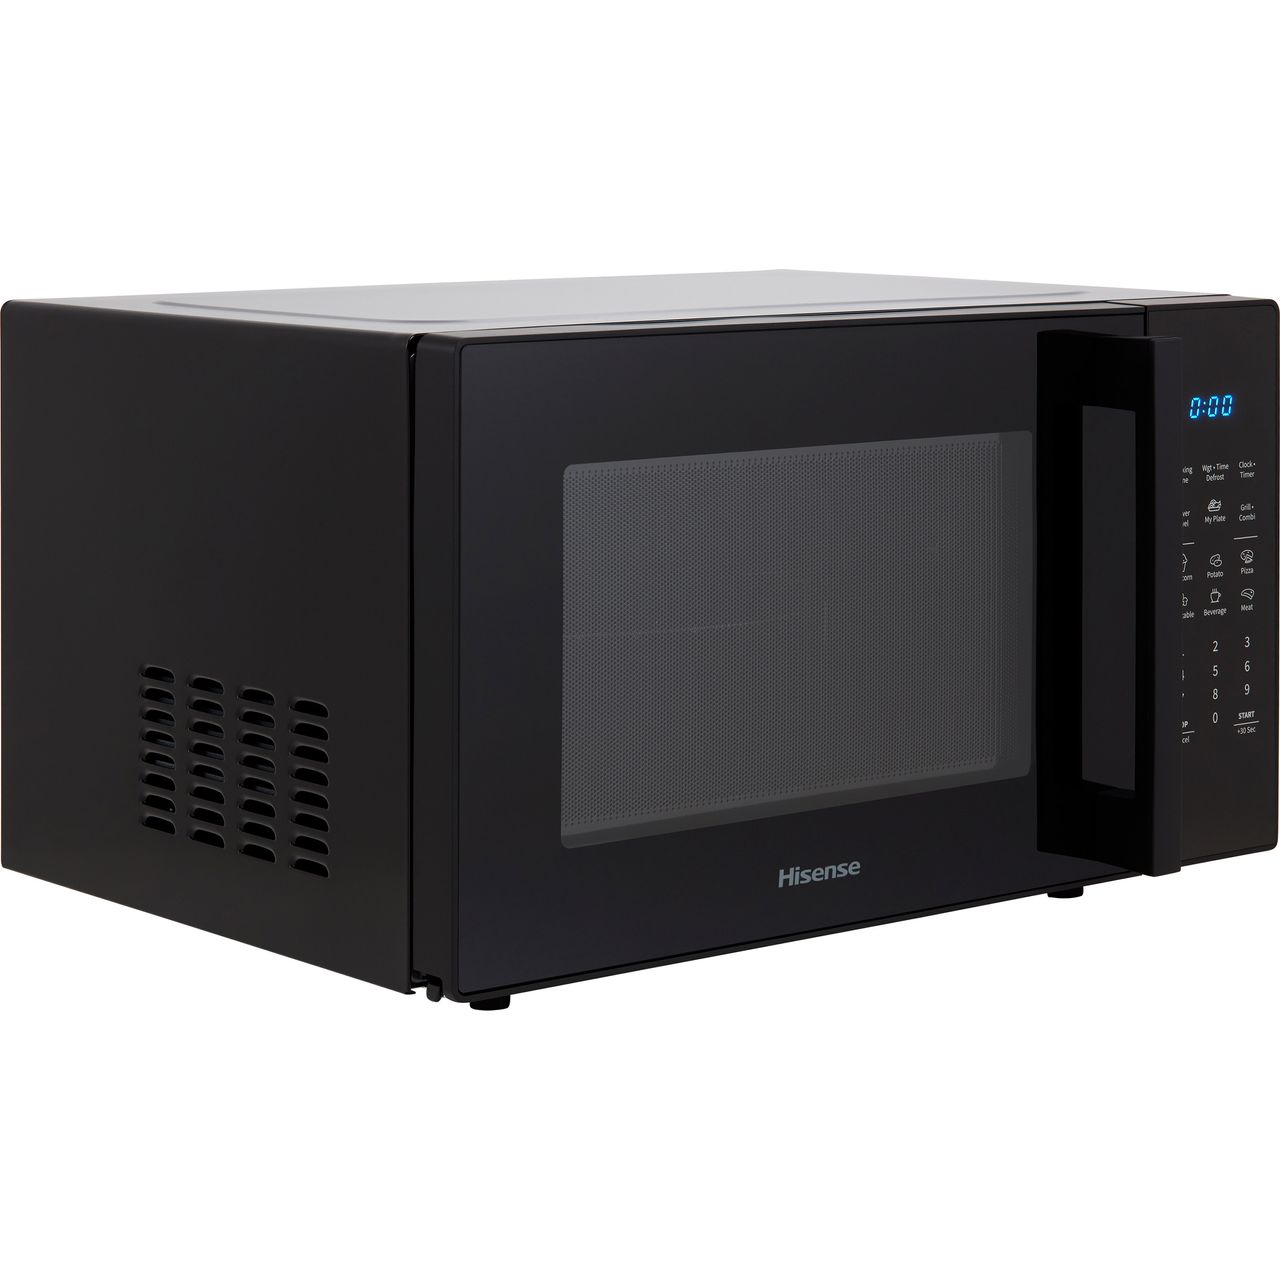 Black L x W x H Hisense H28MOBS8HGUK Freestanding 28 Litre Microwave With Grill 17 x 20 x 12 inches 